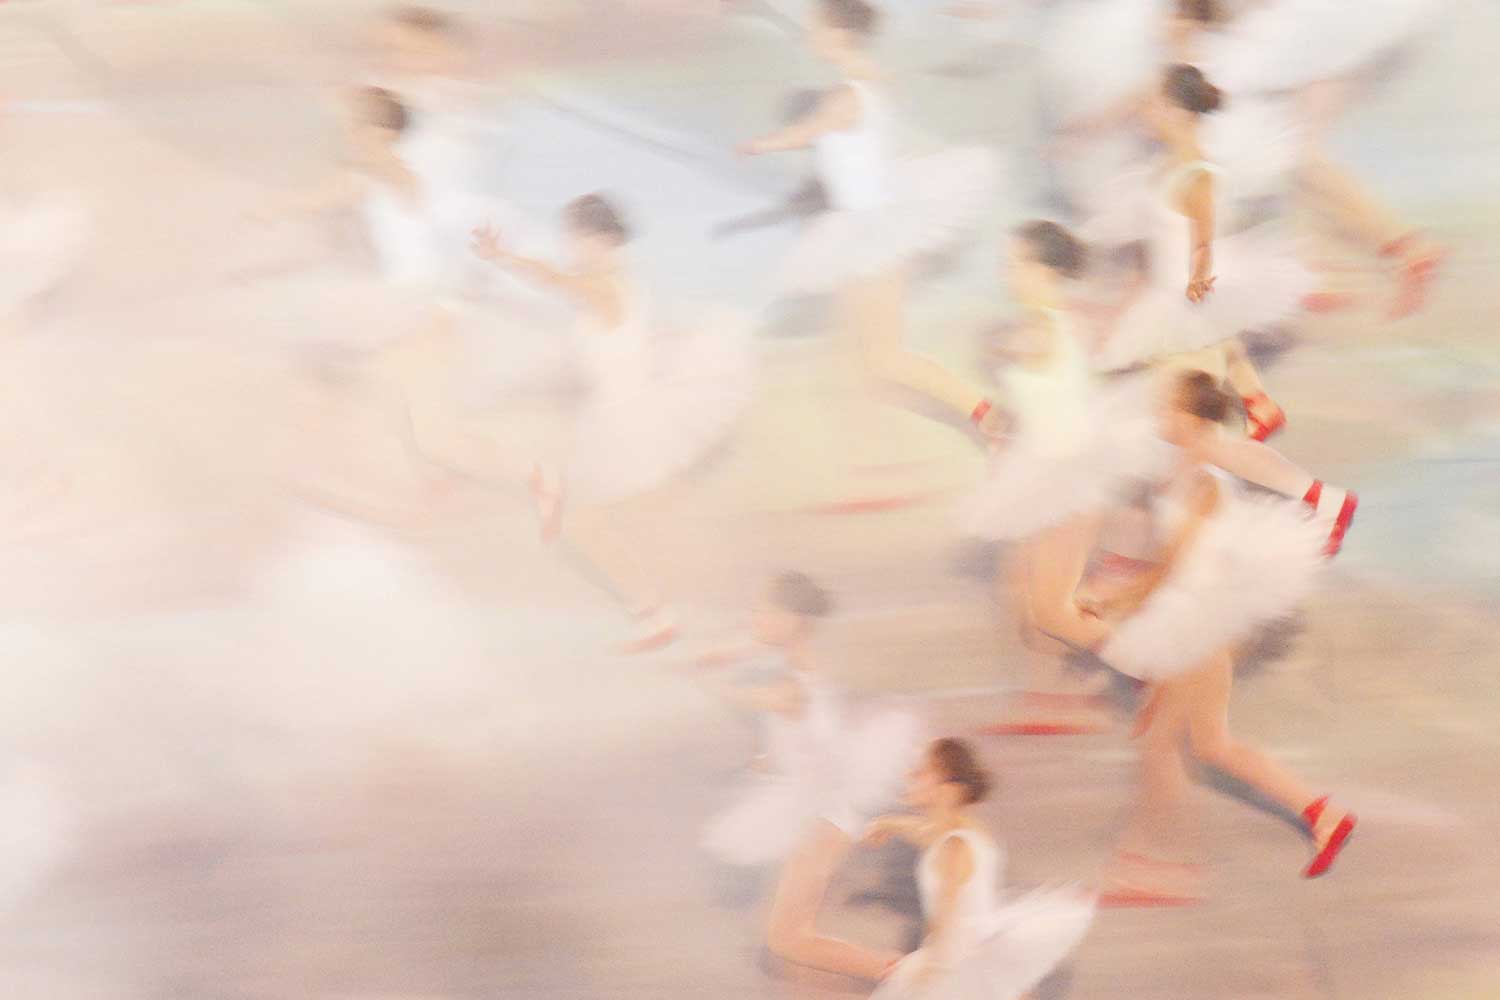 Ballerinas dance during the Opening Ceremony of the Sochi 2014 Paralympic Winter Games at Fisht Olympic Stadium on March 7, 2014 in Sochi, Russia.